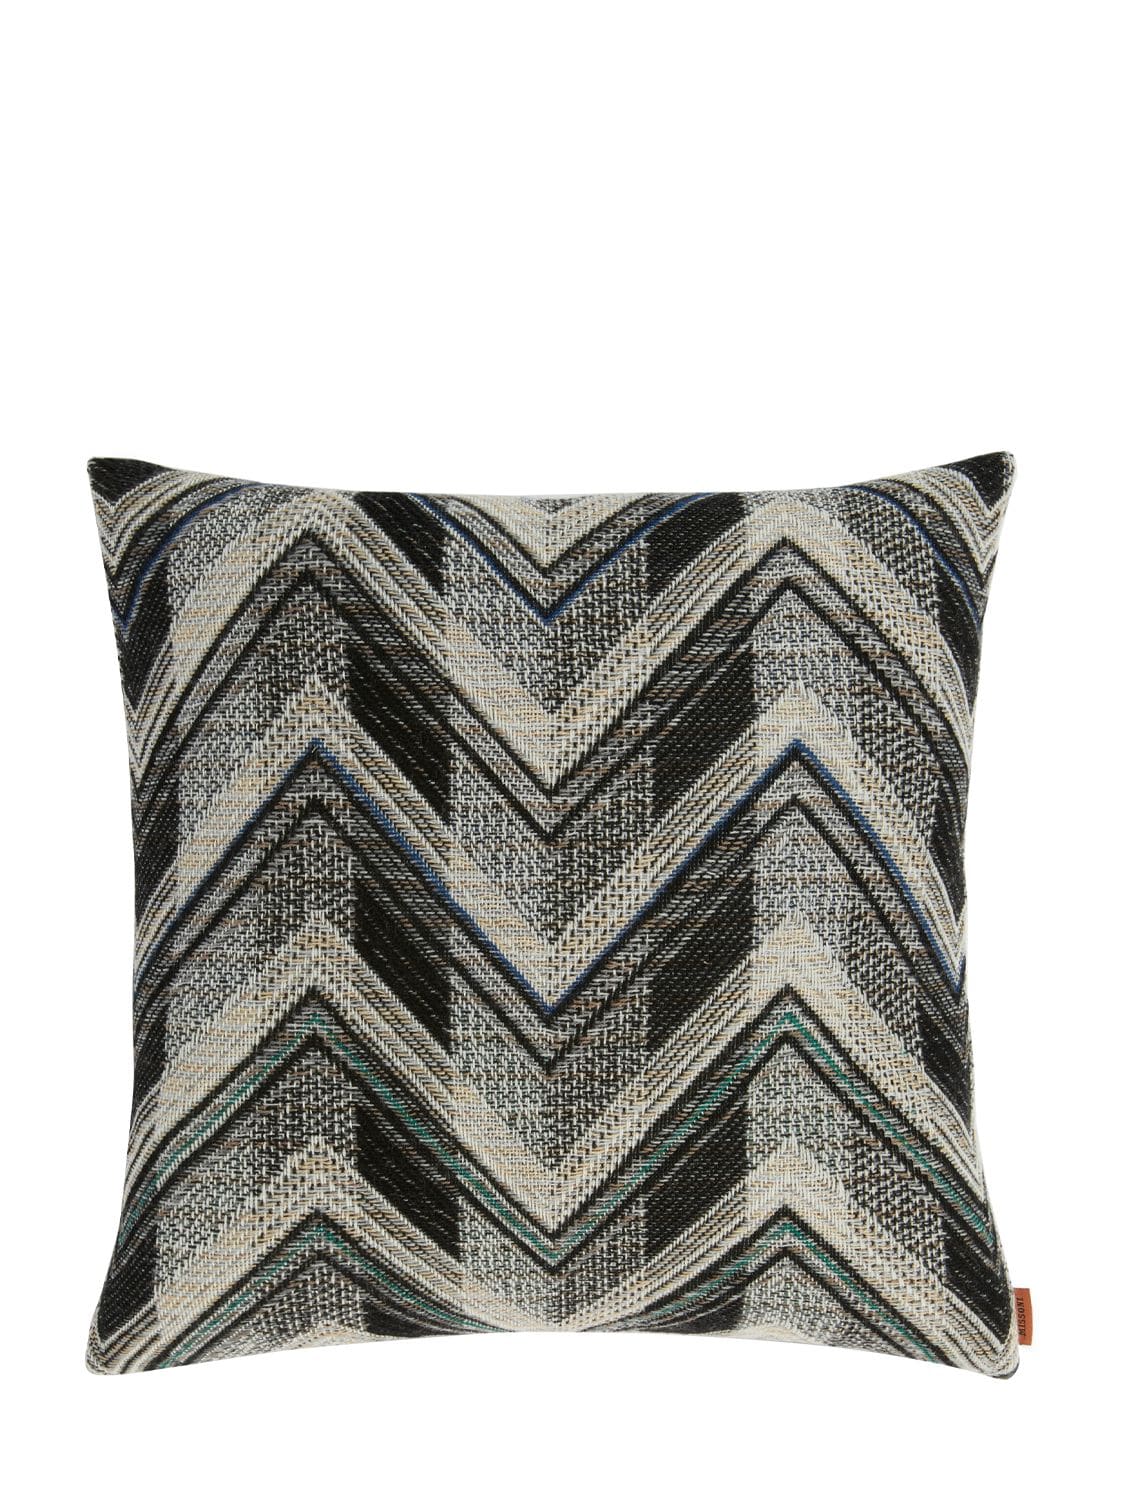 Missoni Home Collection Brent Cushion In Black